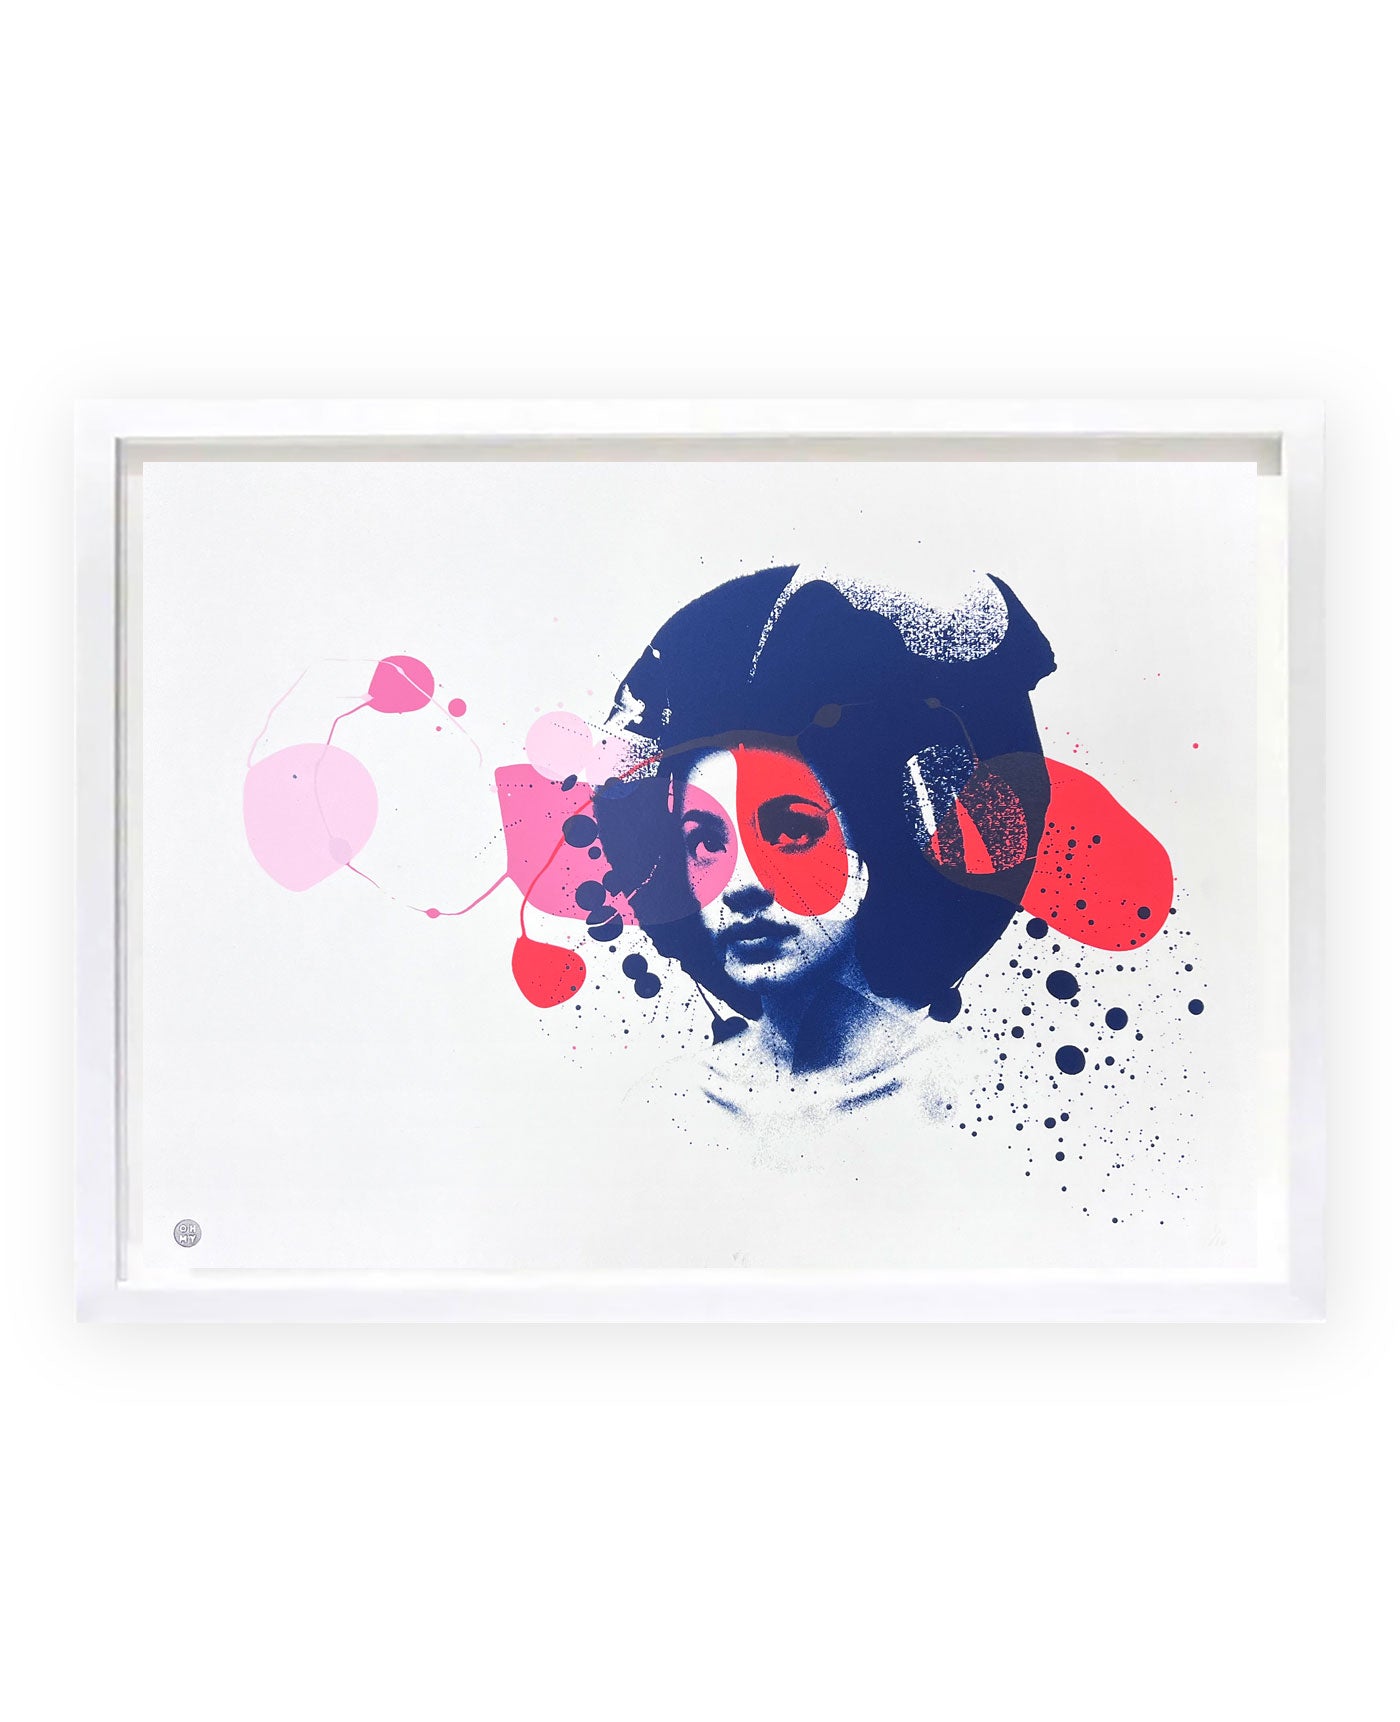 Isotype A3 pink, red and blue by Mark Yates exclusive to Heath Kane Gallery